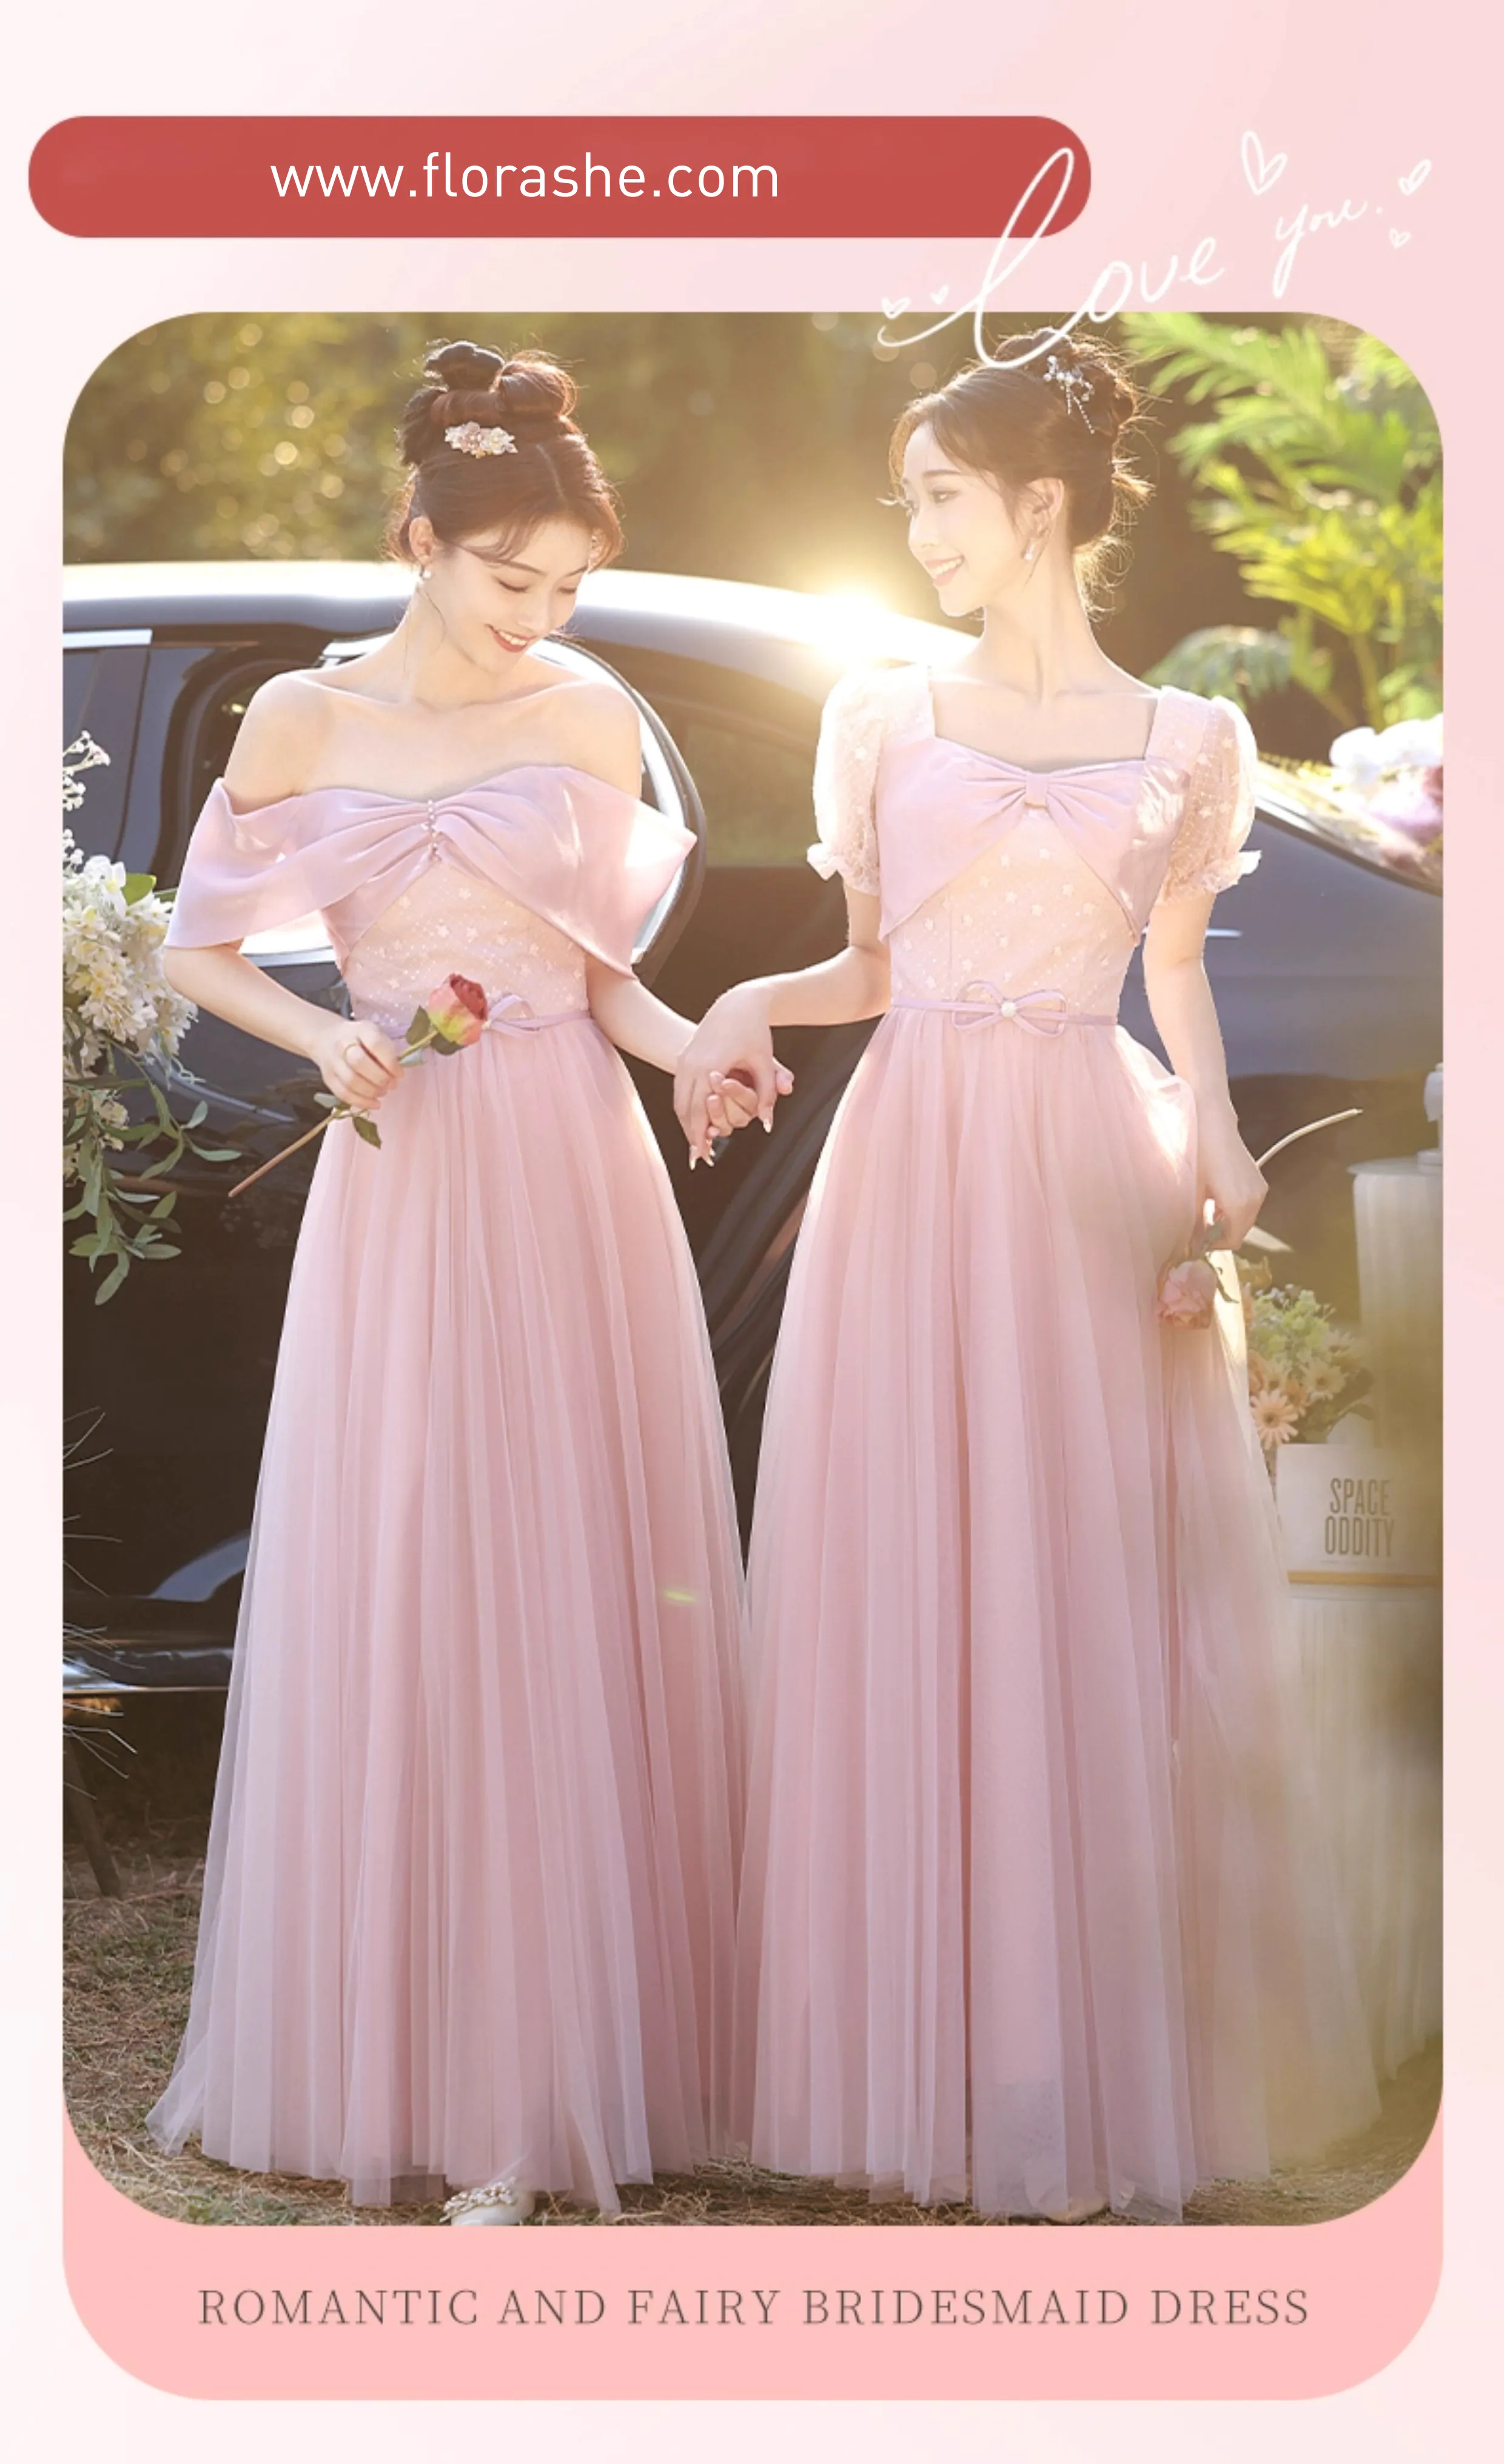 Sweet-Off-the-Shoulder-Pink-Birthday-Party-Bridesmaid-Dress-Evening-Gown12